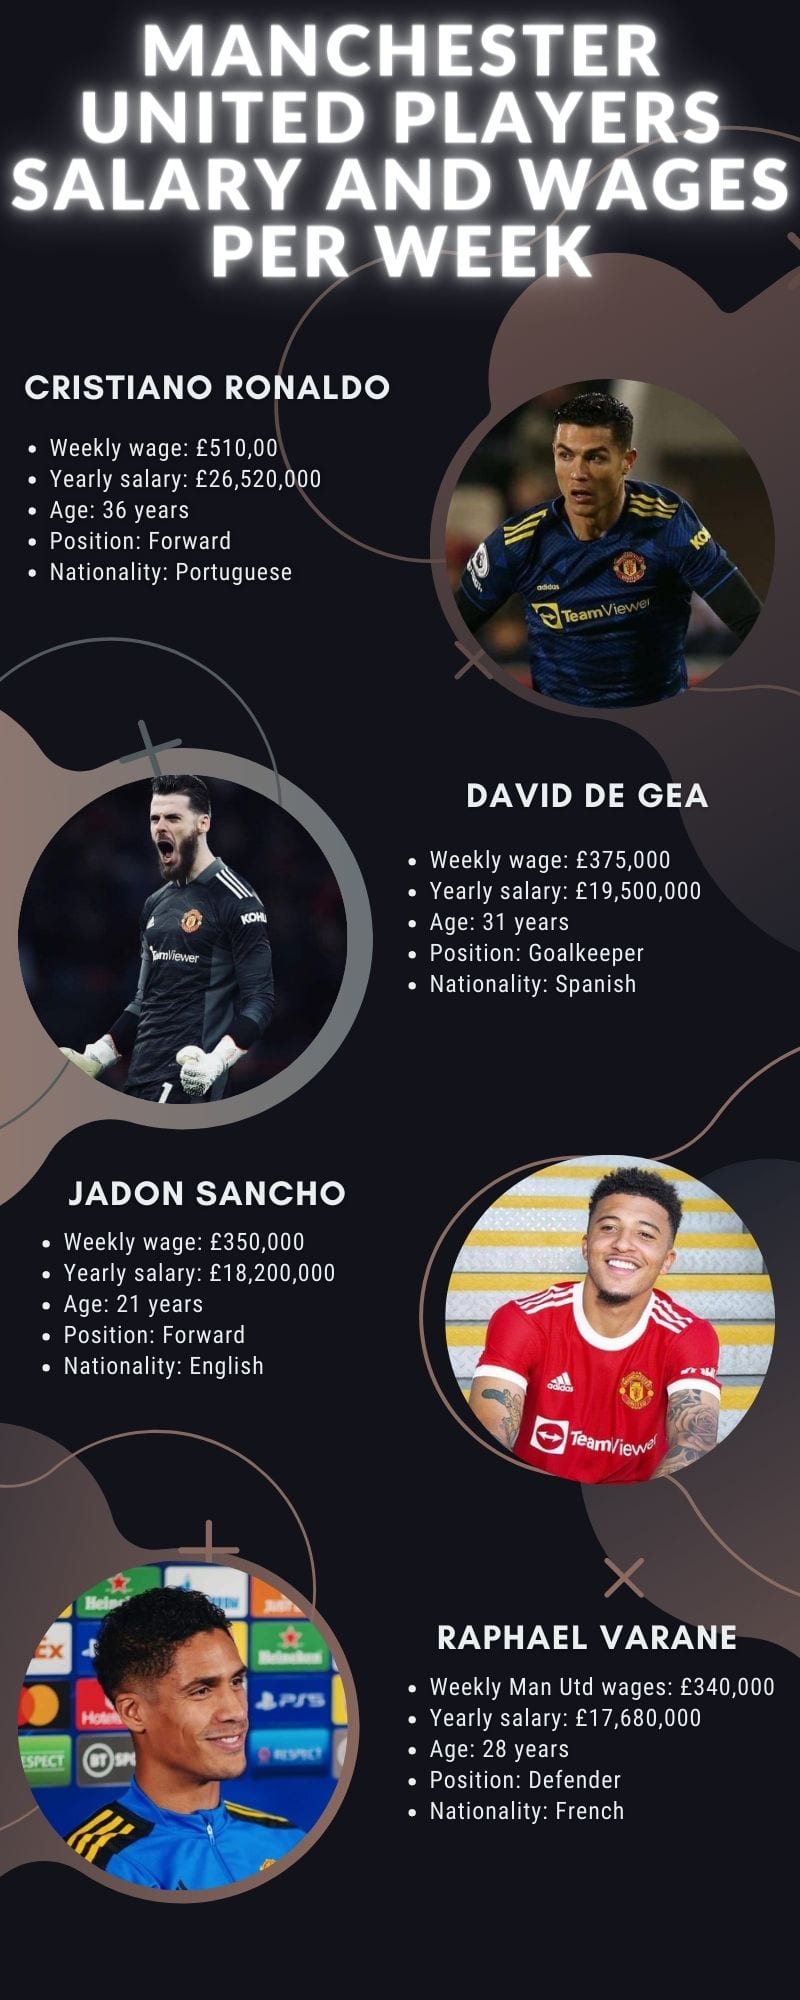 Manchester United players salary